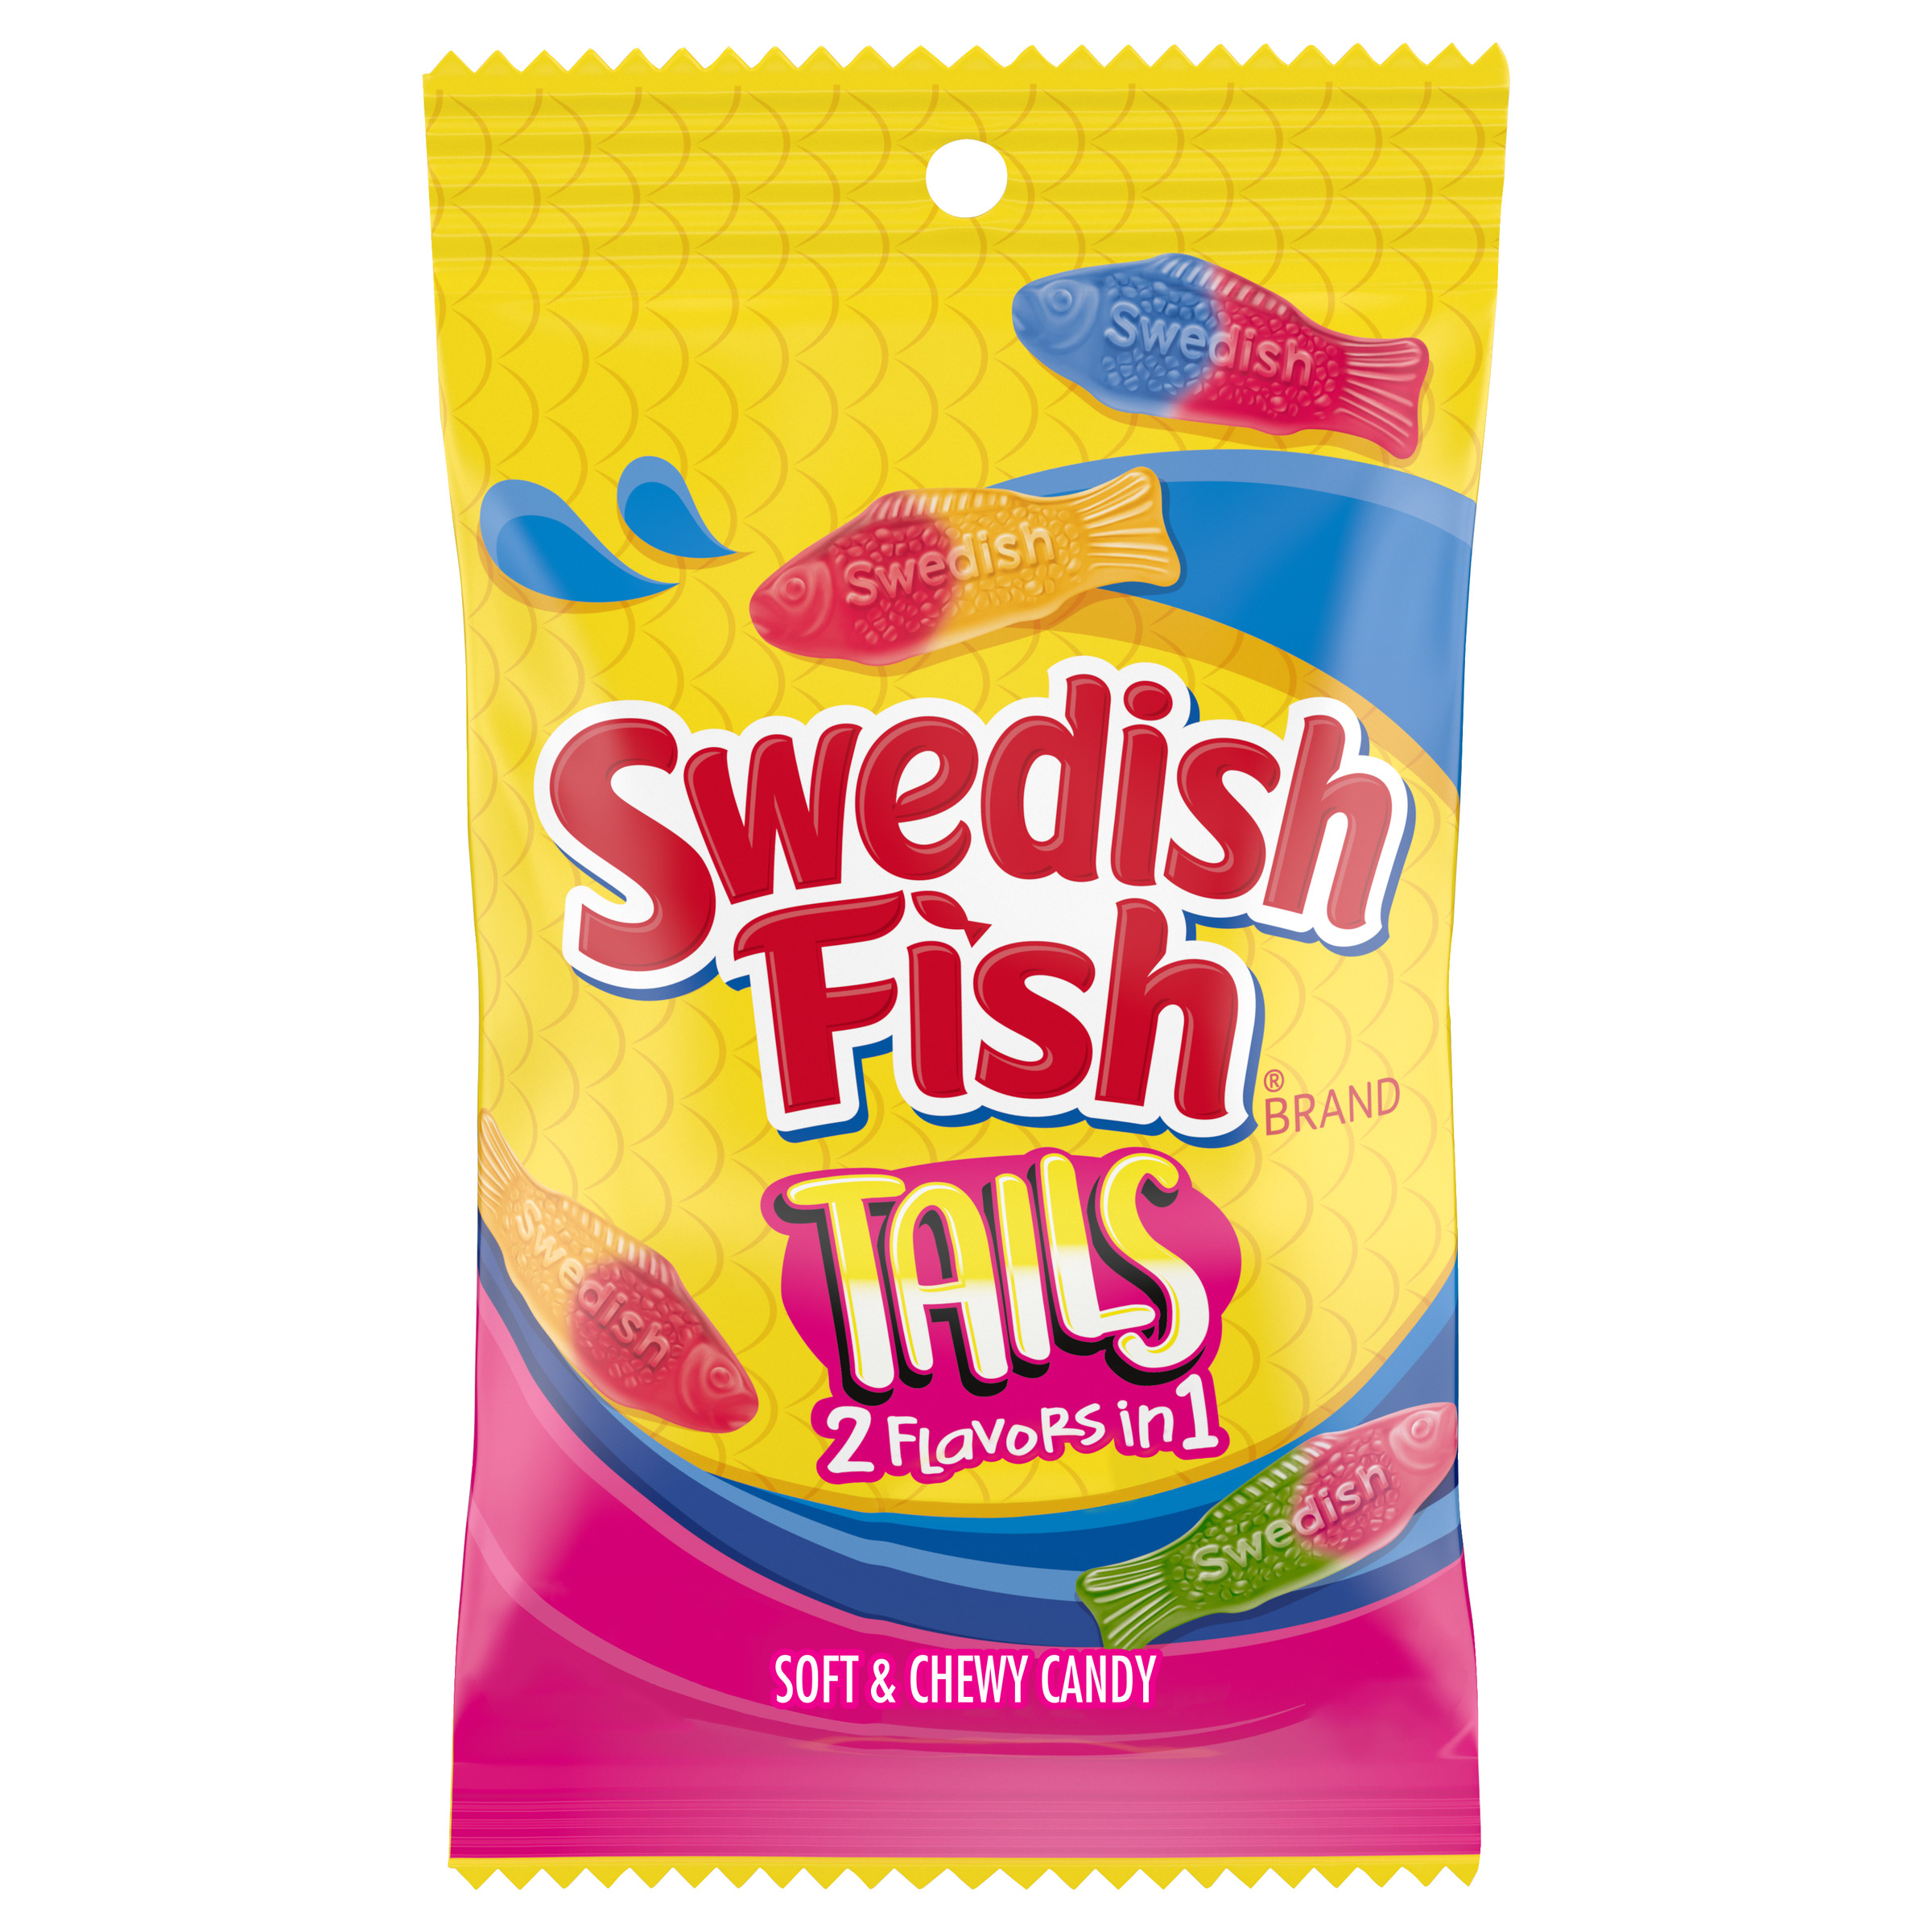 SWEDISH FISH Tails 2 Flavors in 1 Soft & Chewy Candy, 8 oz